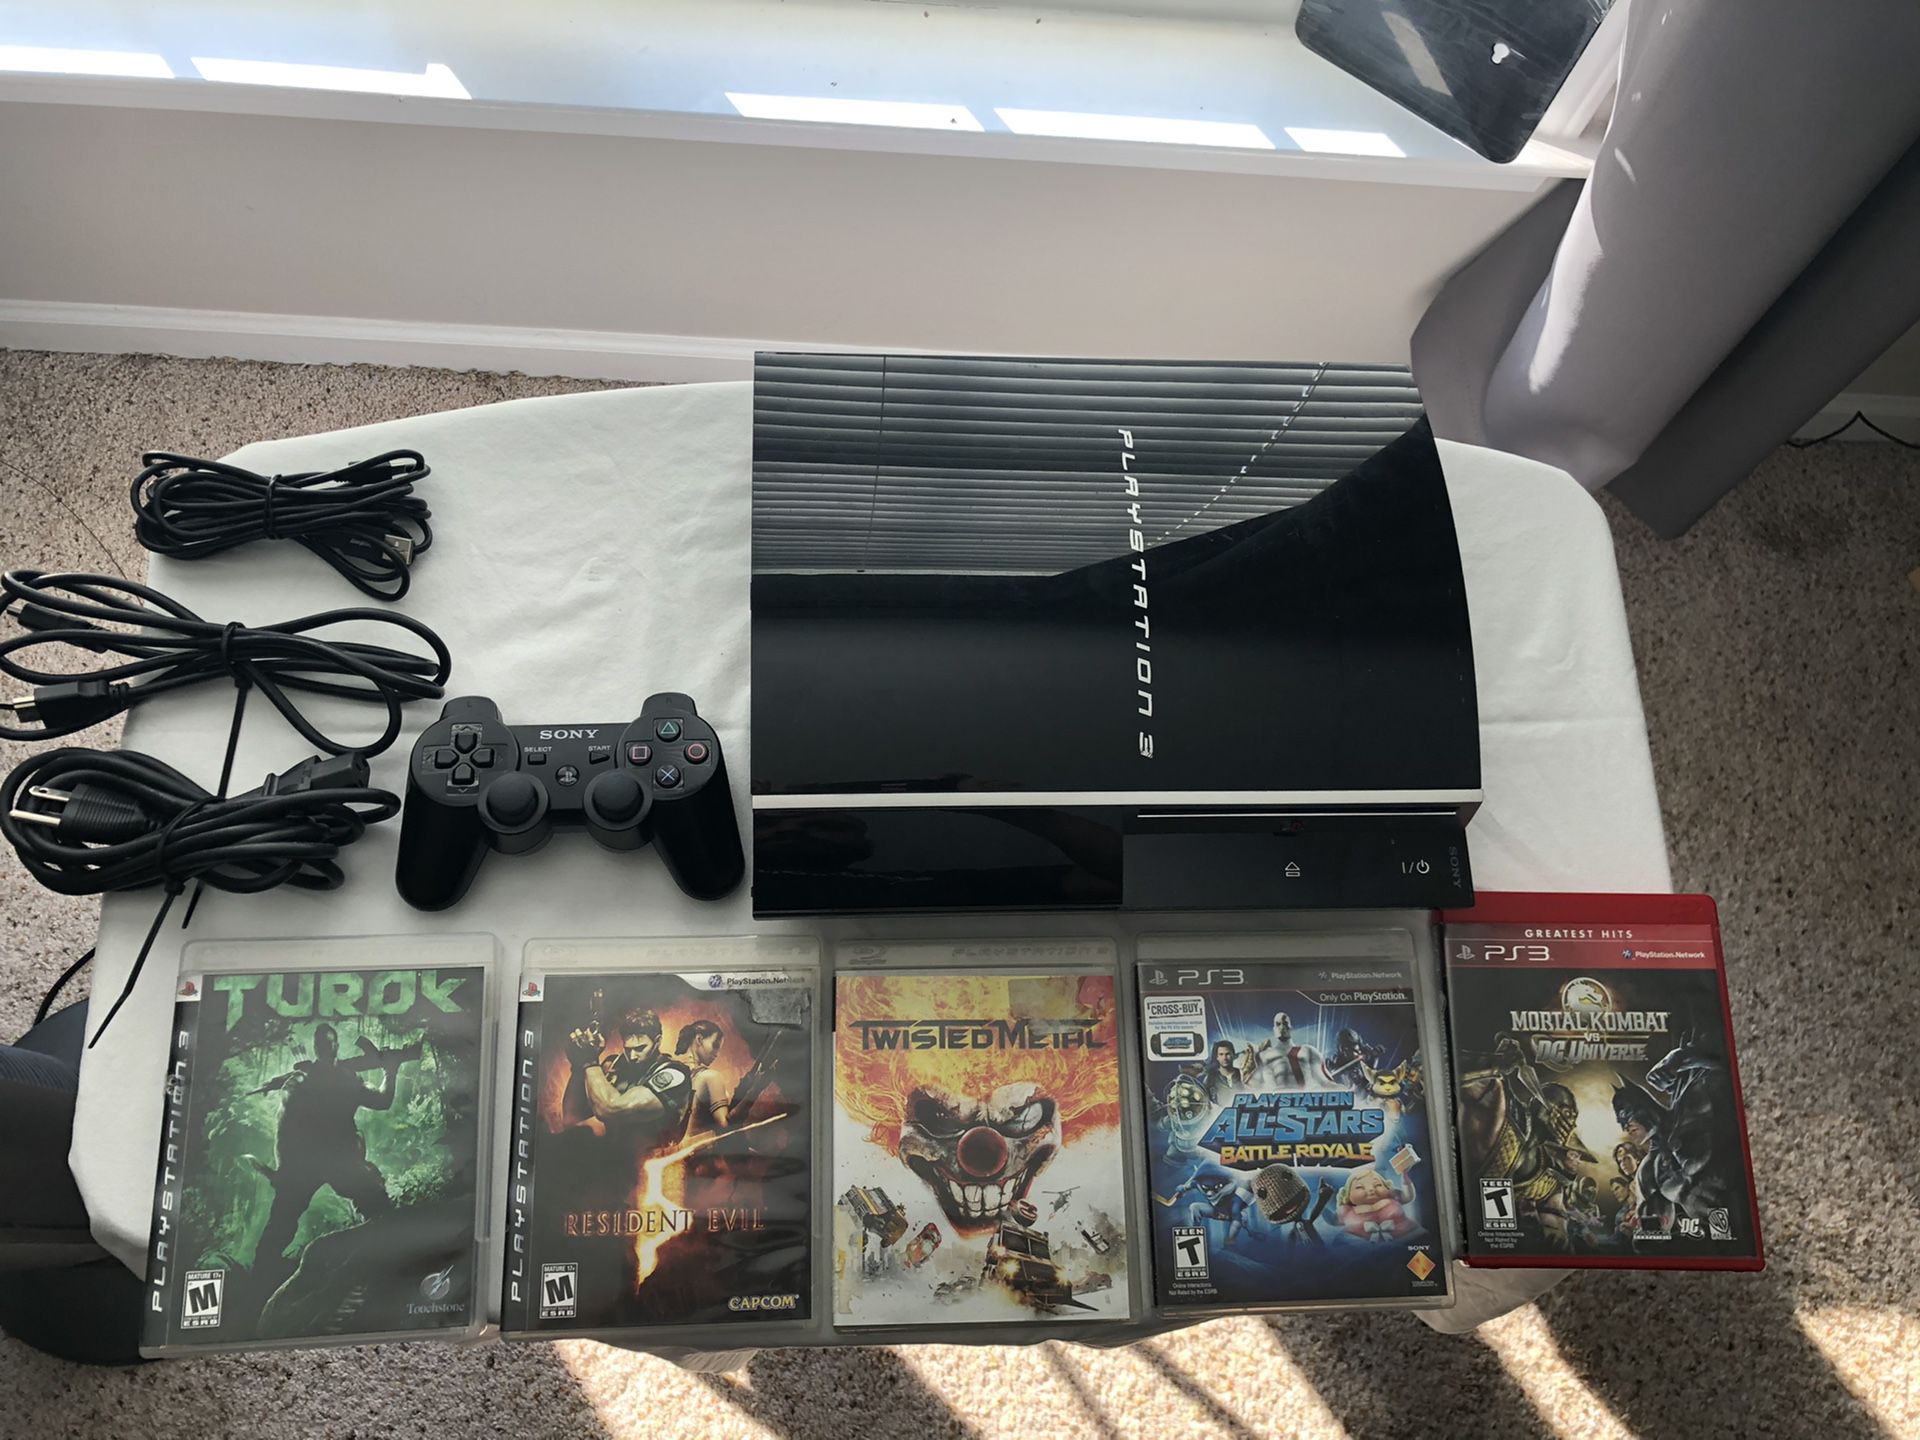 320GB PS3 w/CFW and extras